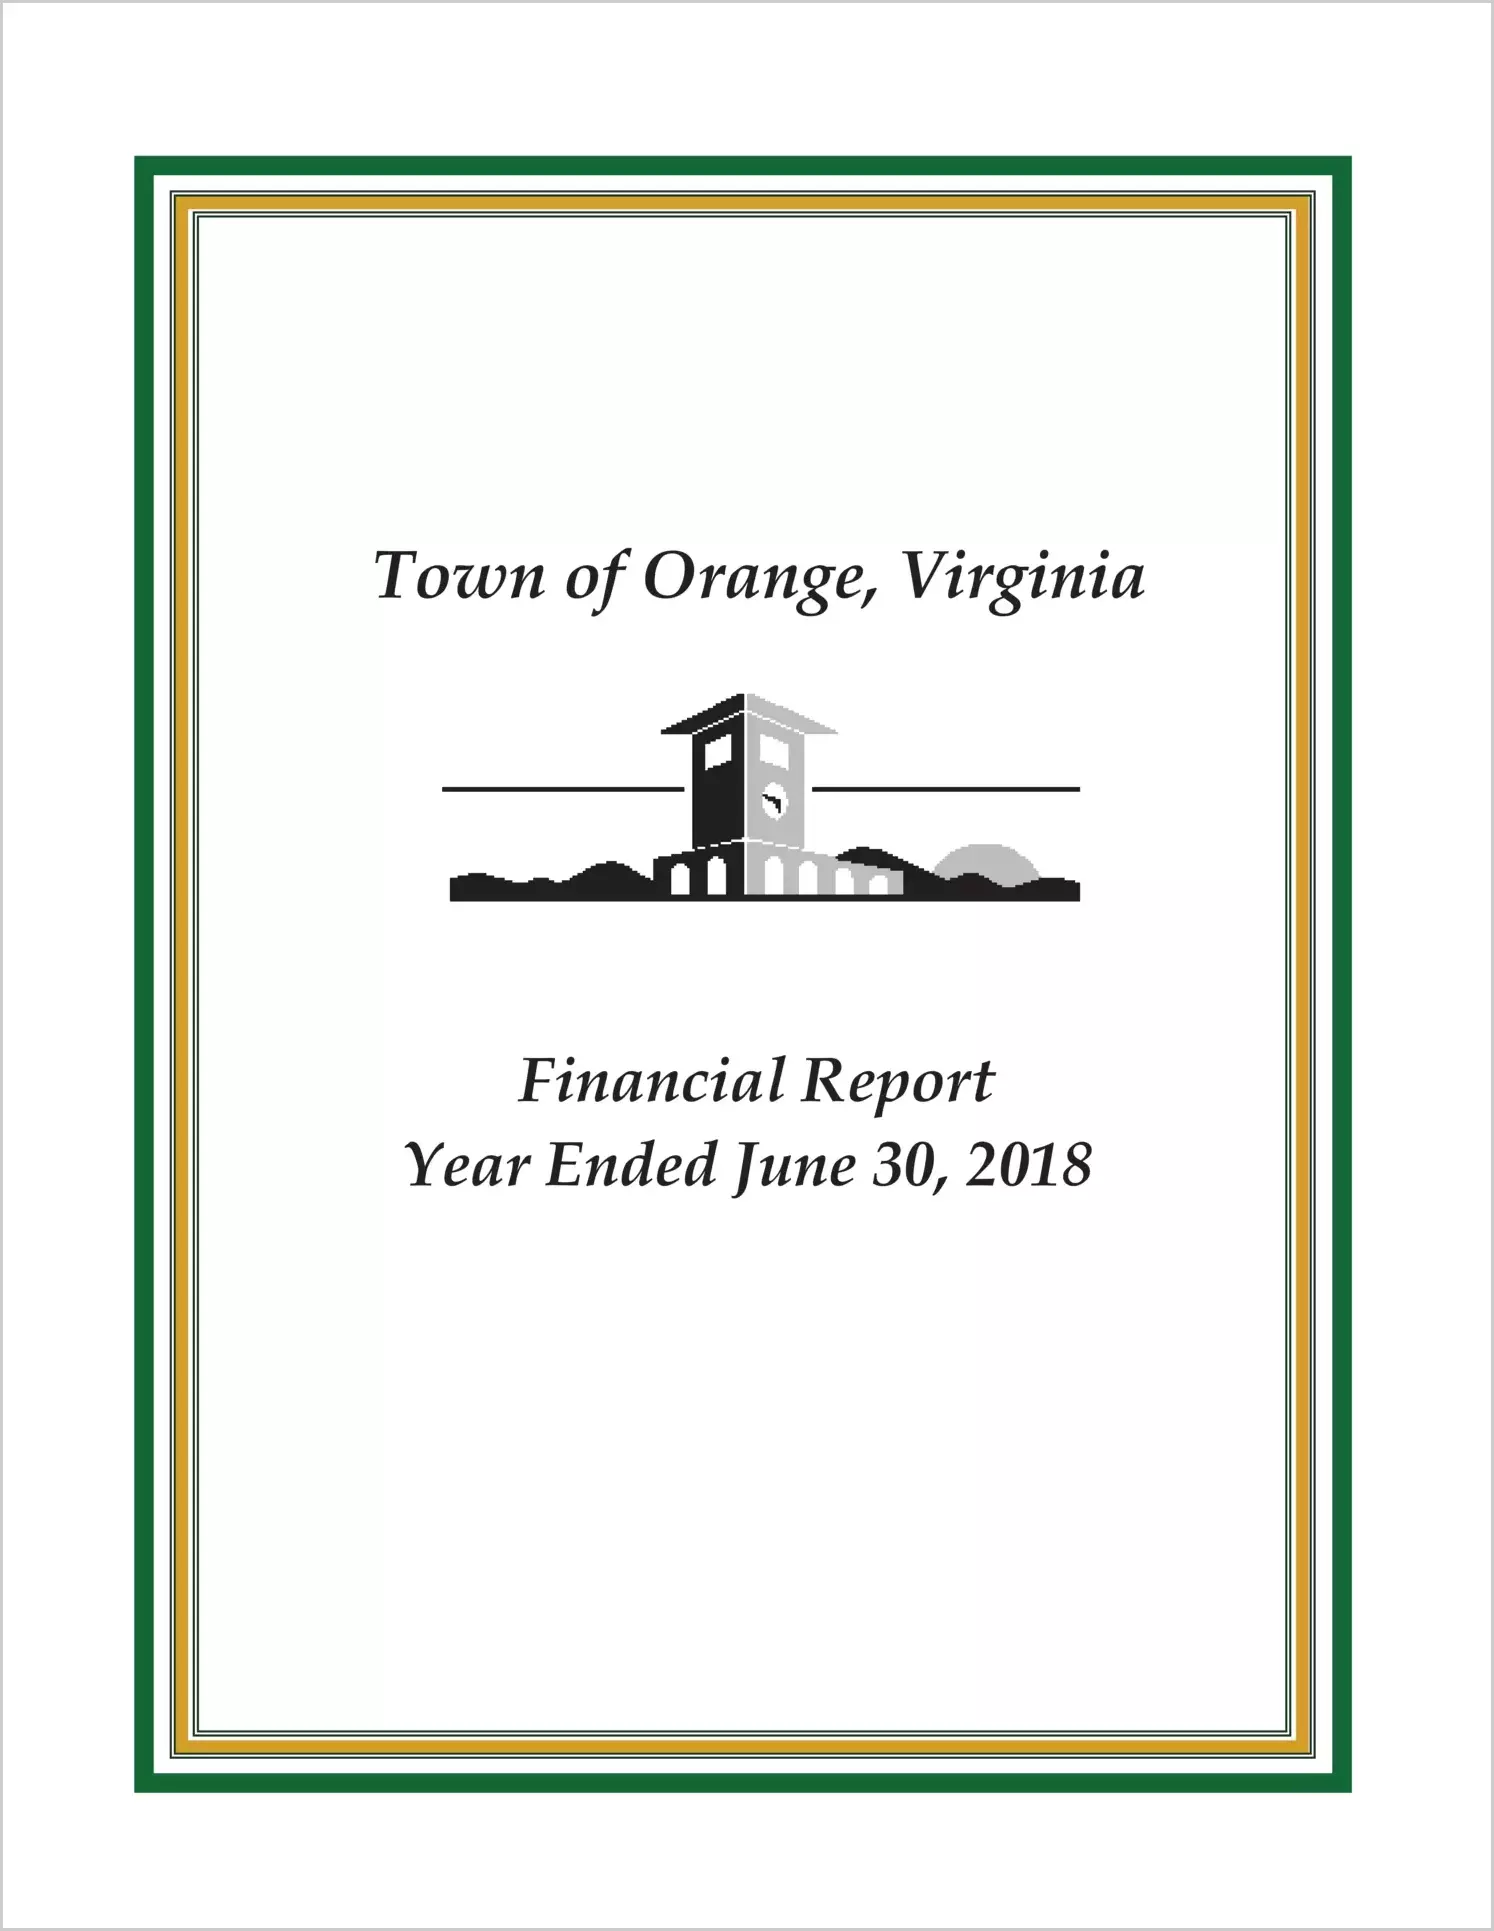 2018 Annual Financial Report for Town of Orange